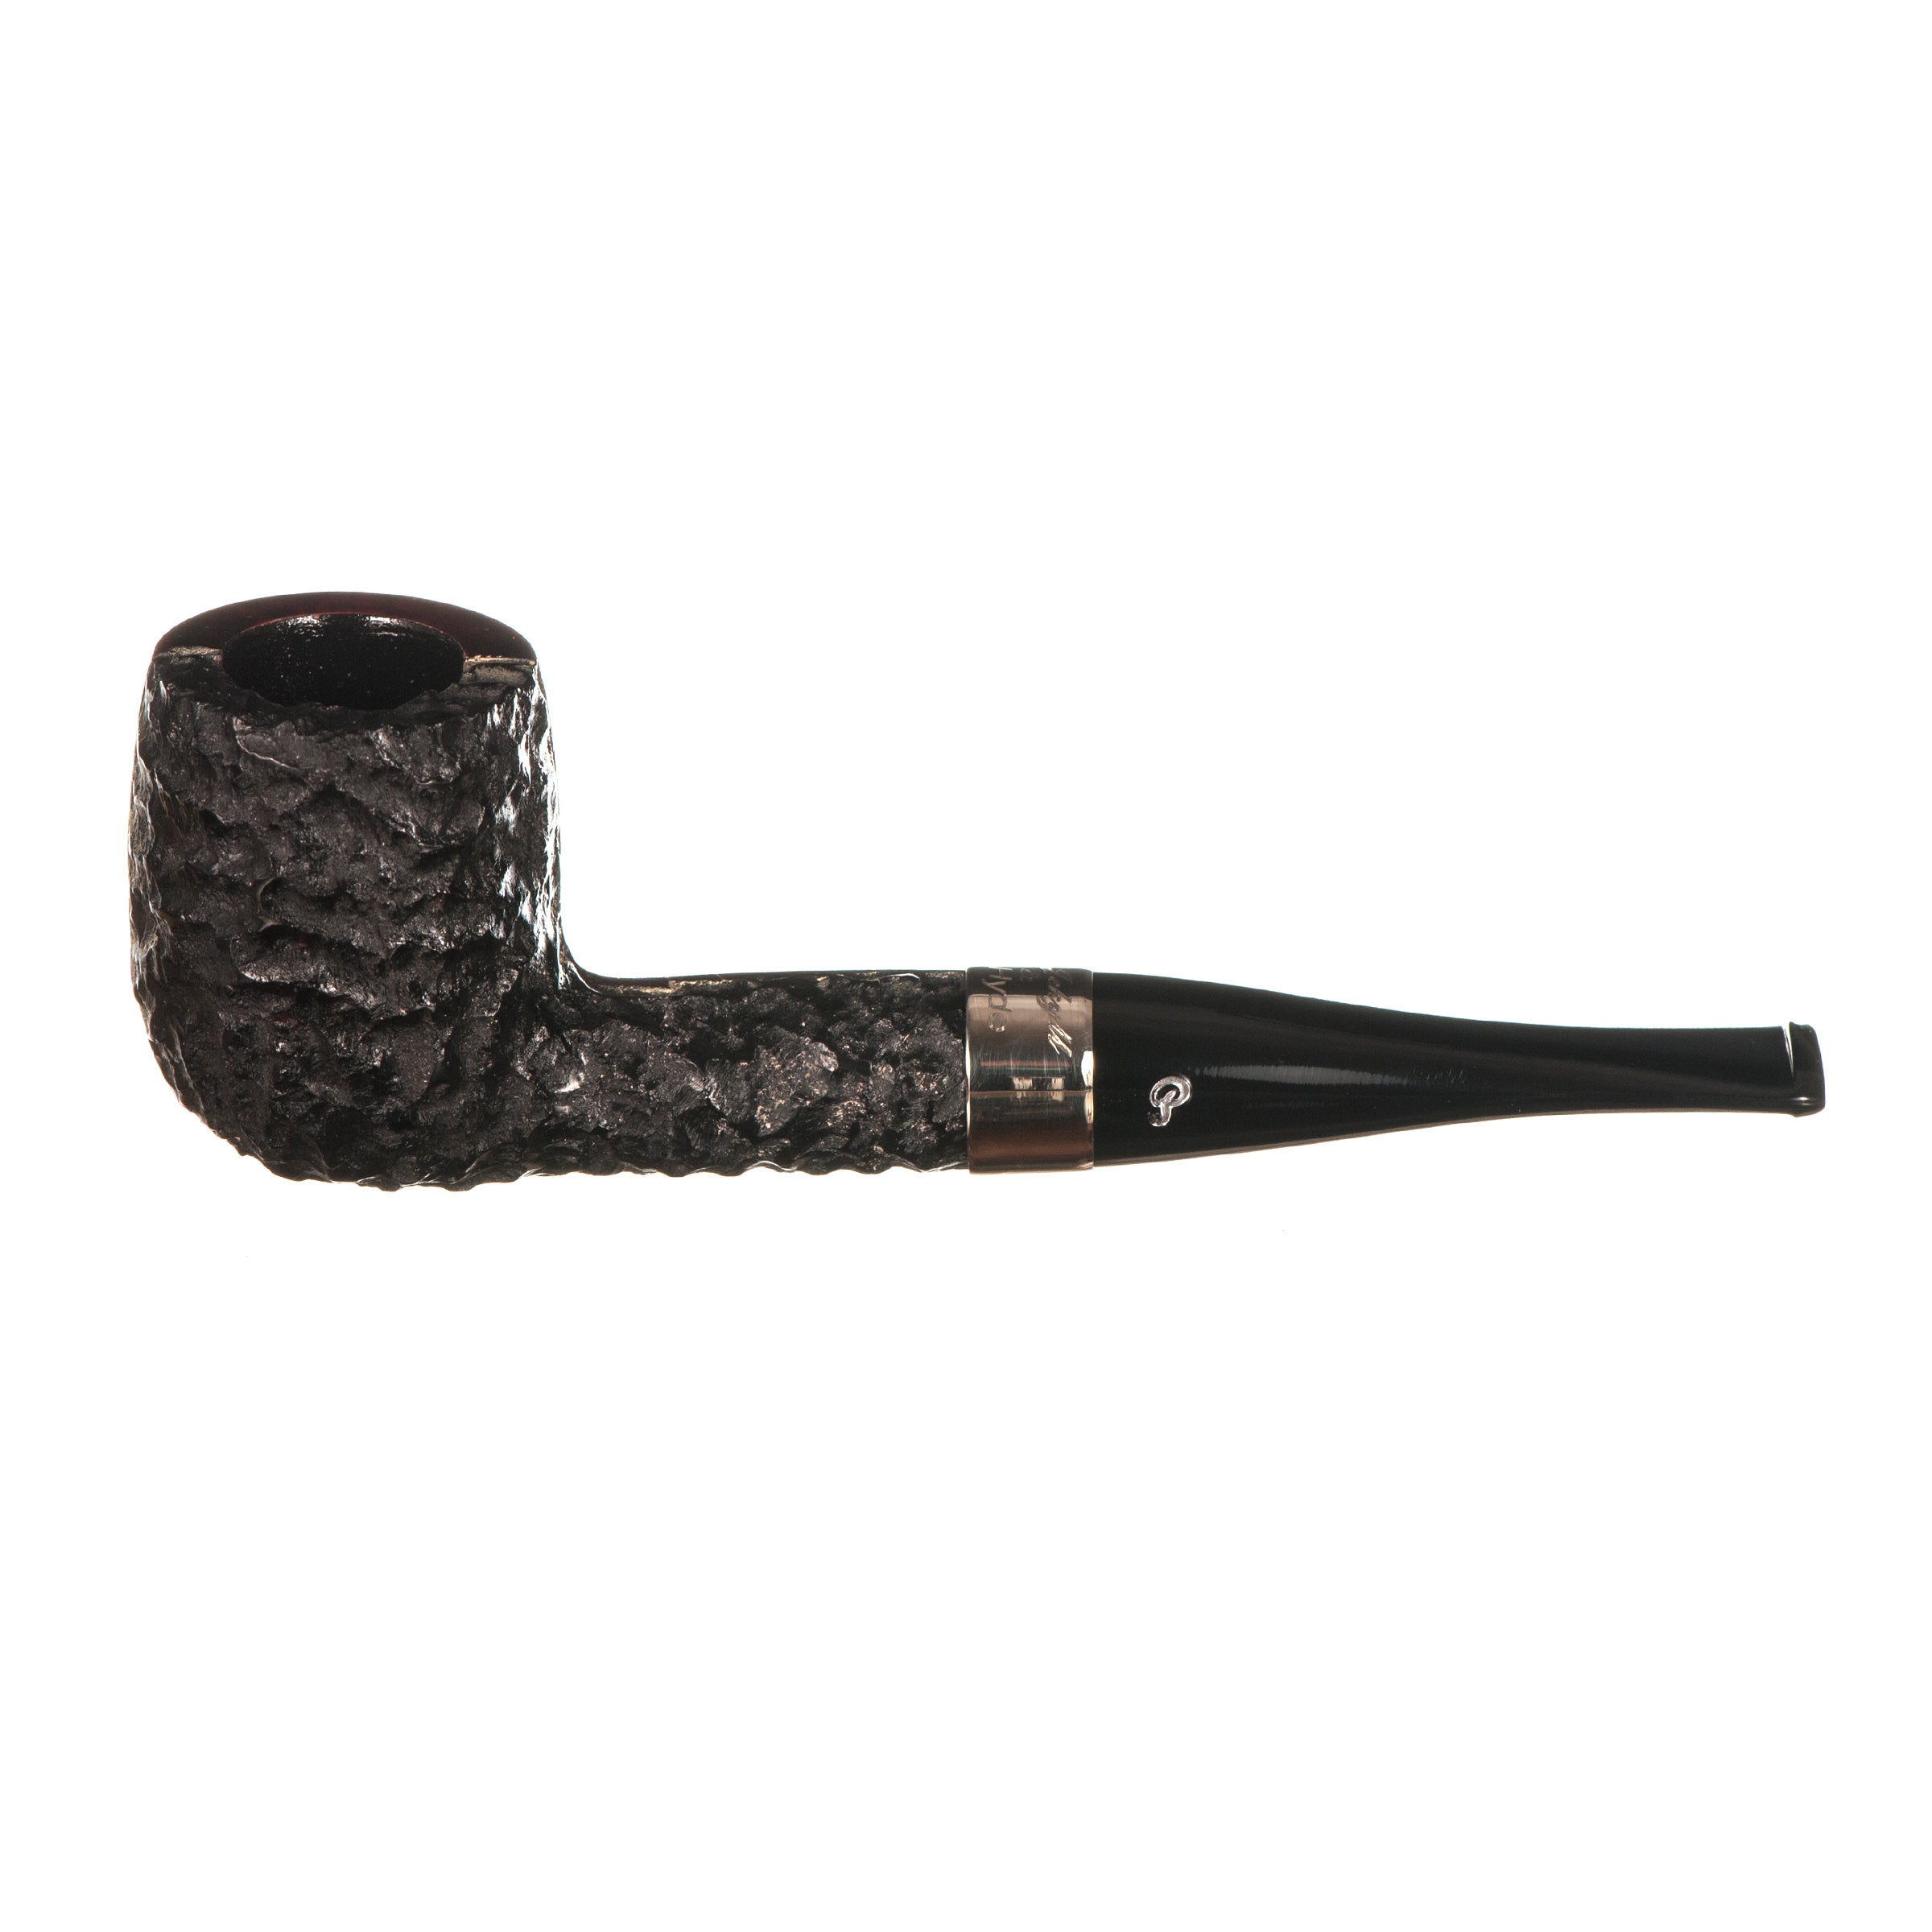 Peterson Jekyll & Hyde 106 Rustic/Smooth Pipe